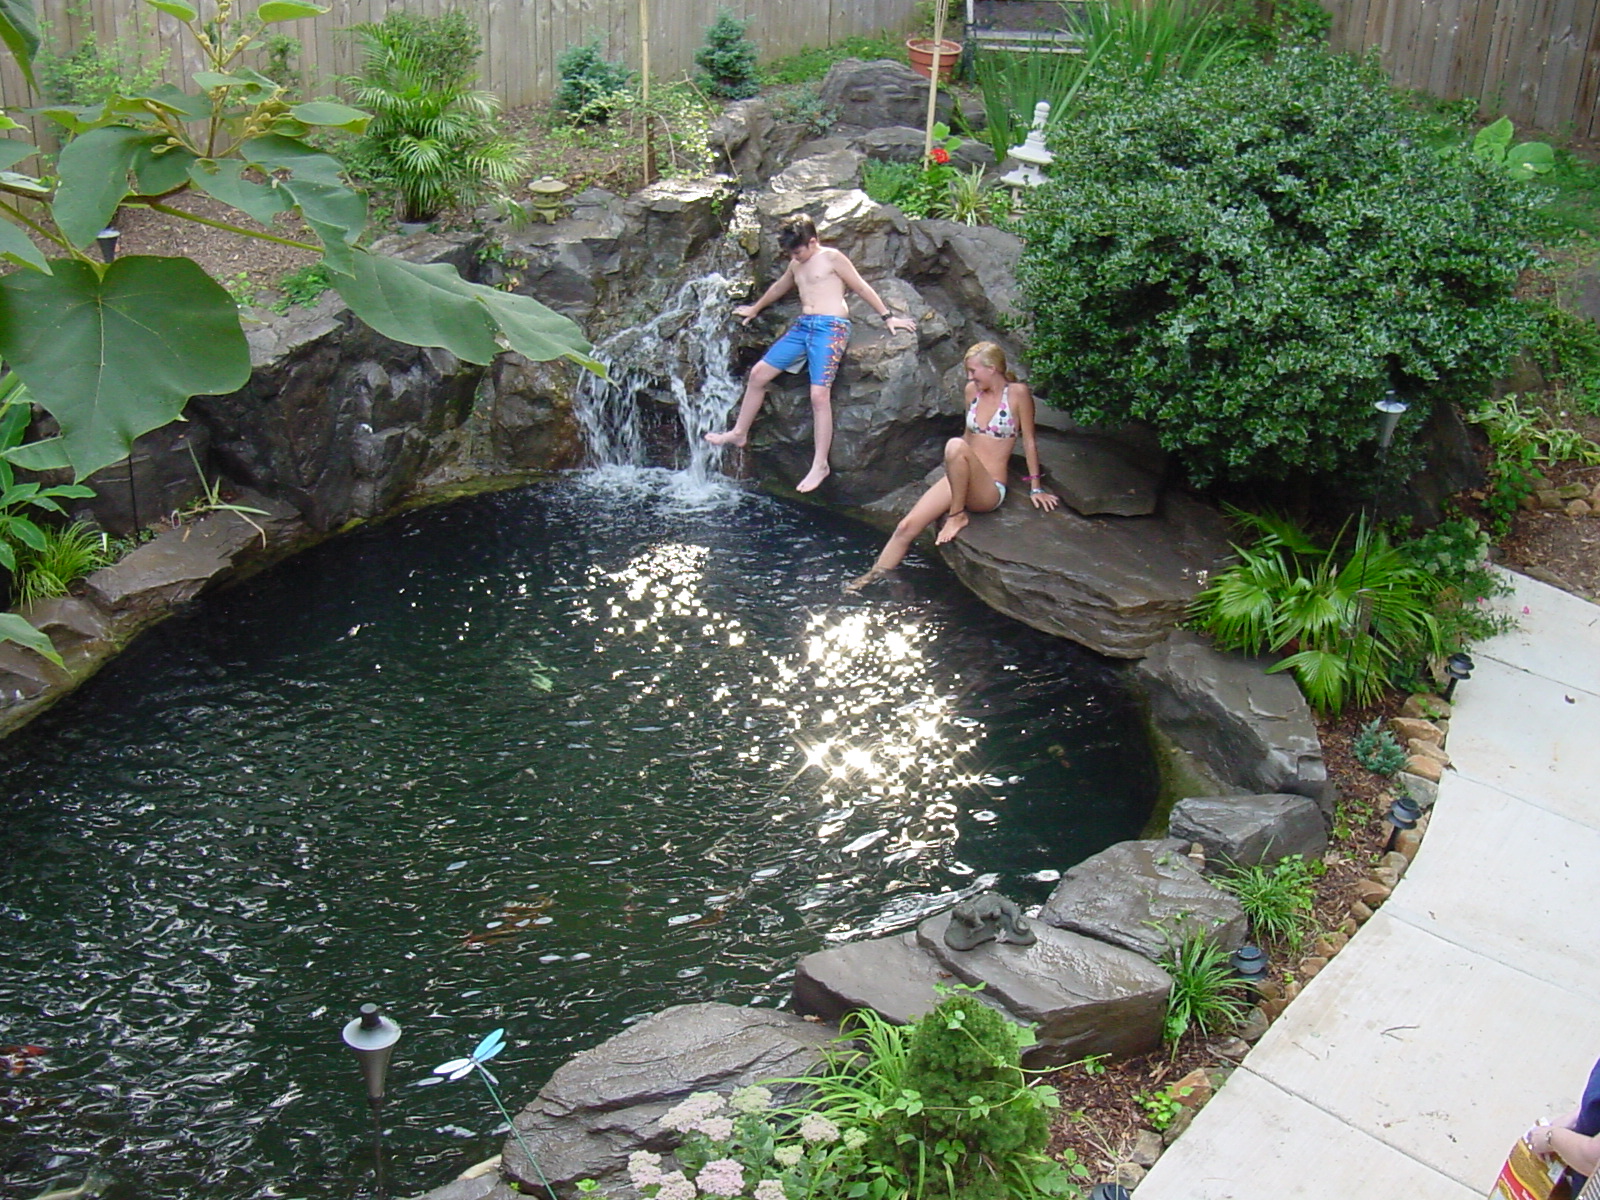 Cast rock formation surrounding a pond, kids swimming with the koi fish